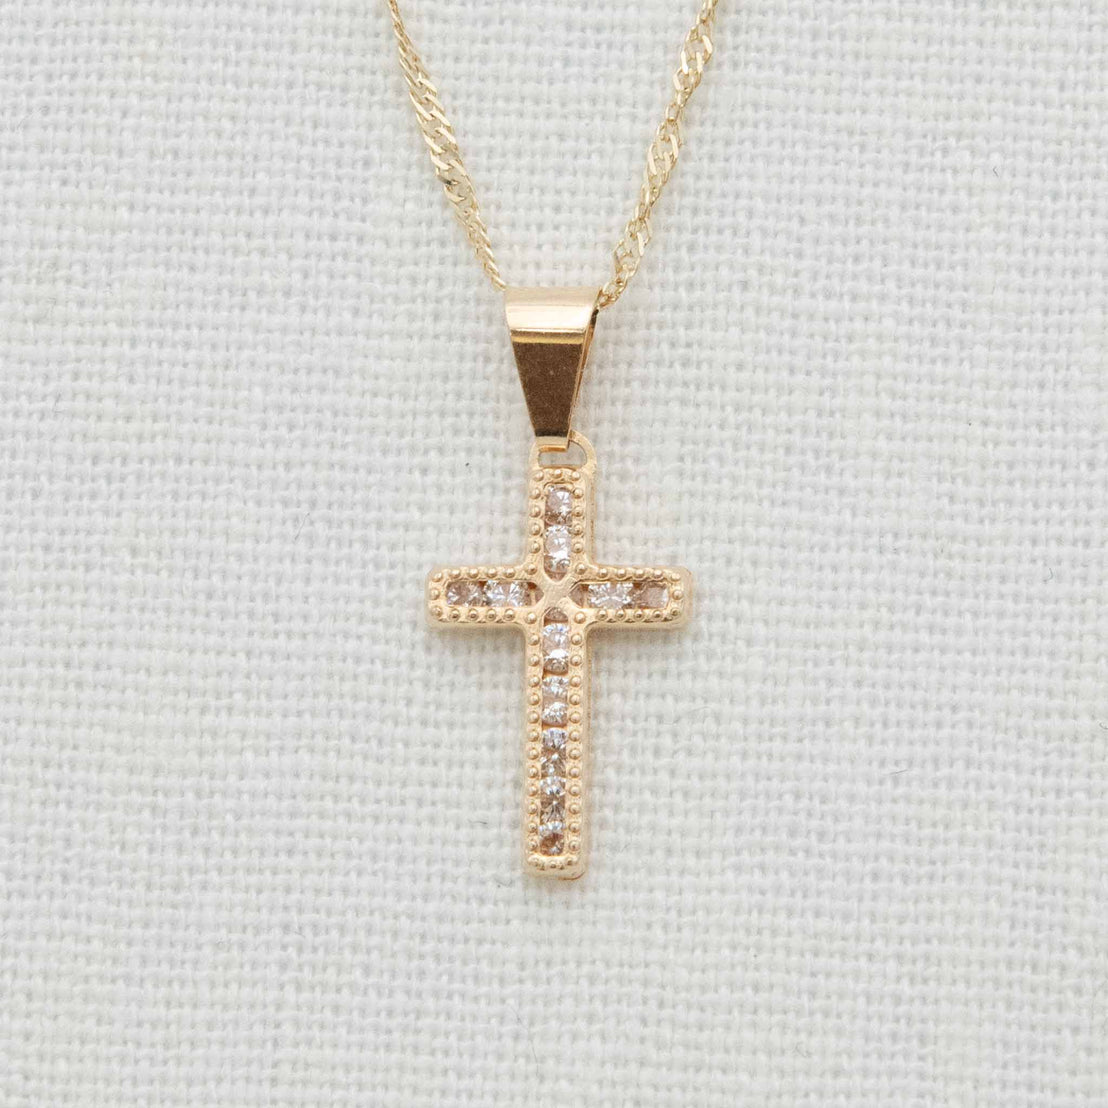 Gold and cubic zirconia cross charm on chain